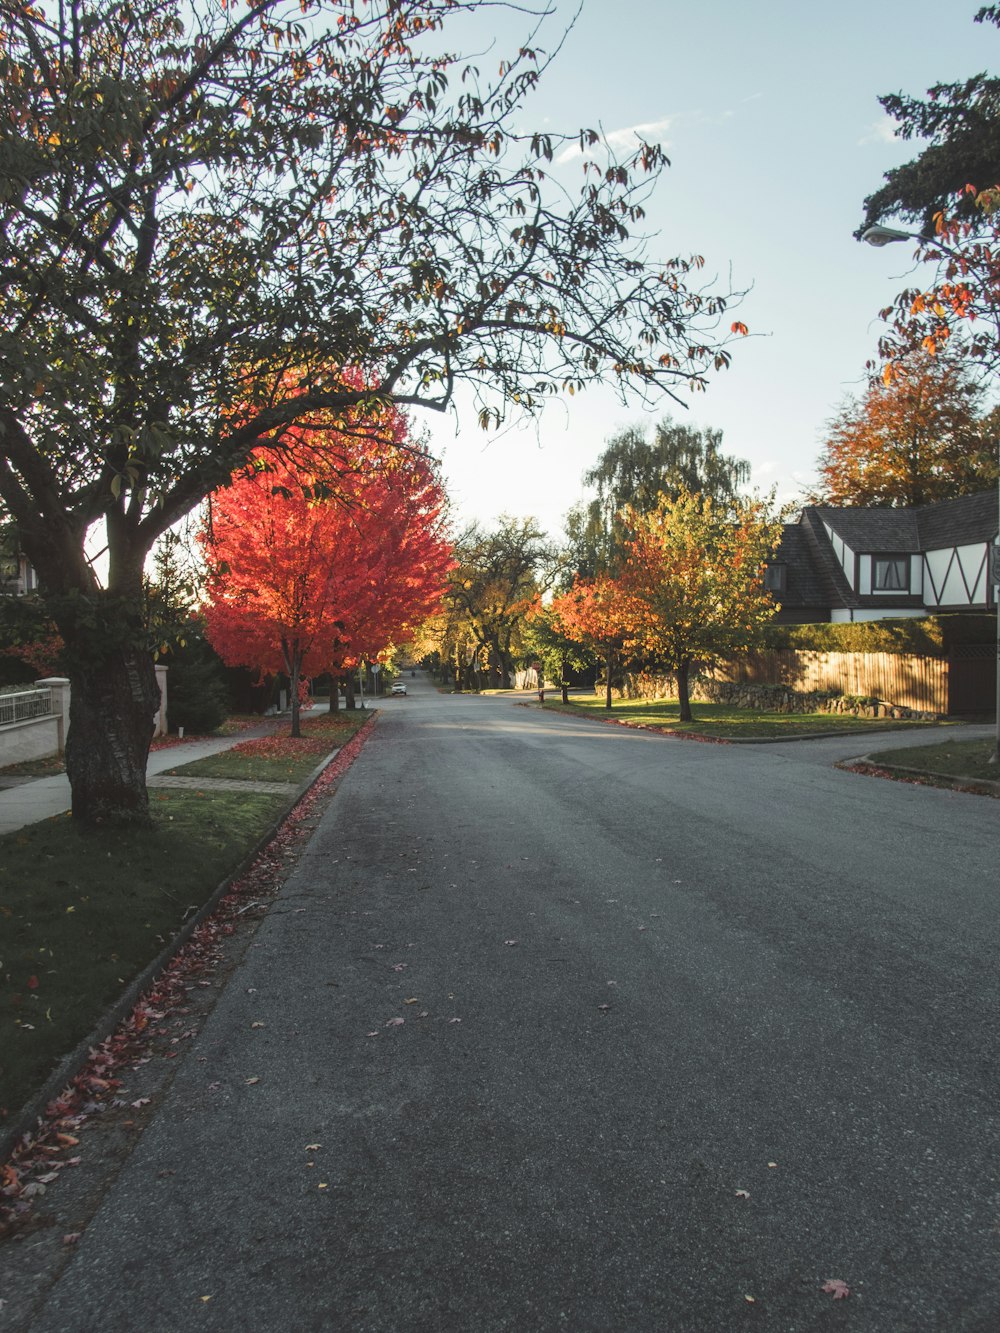 a street lined with trees with red leaves